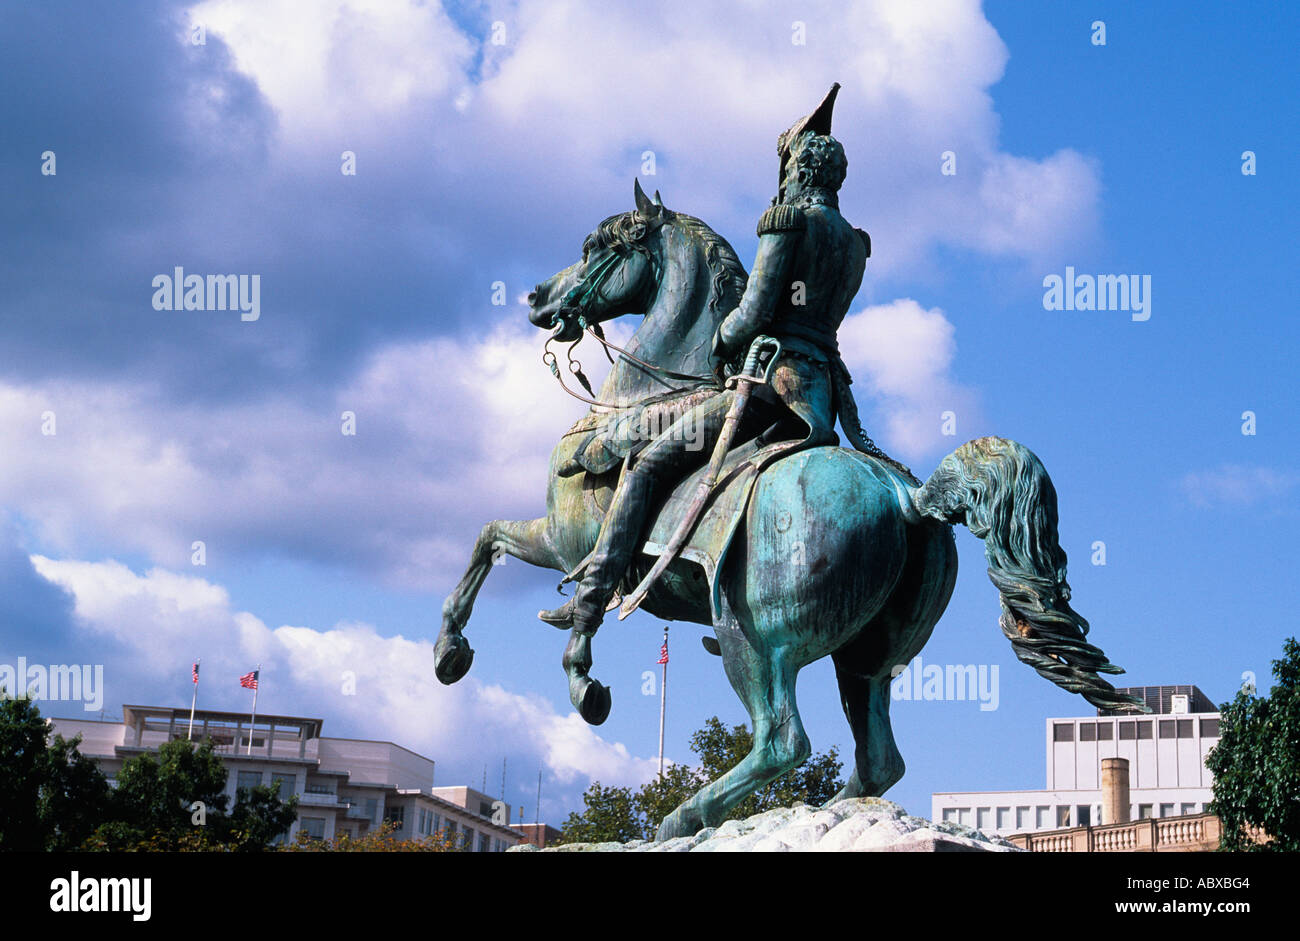 Statue of Andrew Jackson on a horse in Washington DC Stock Photo